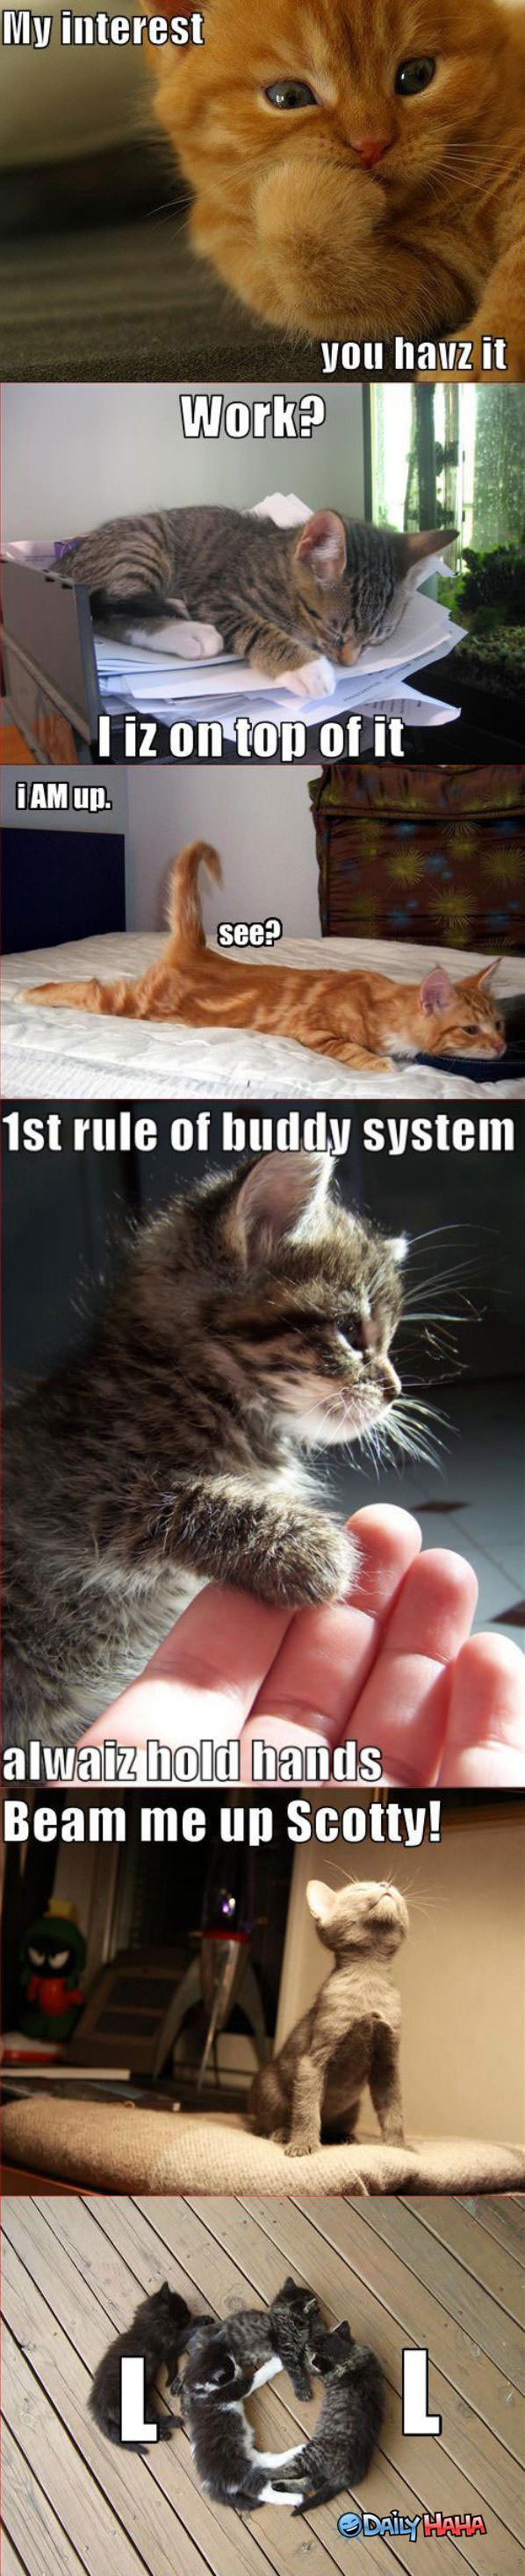 LOLCat Compilation funny picture